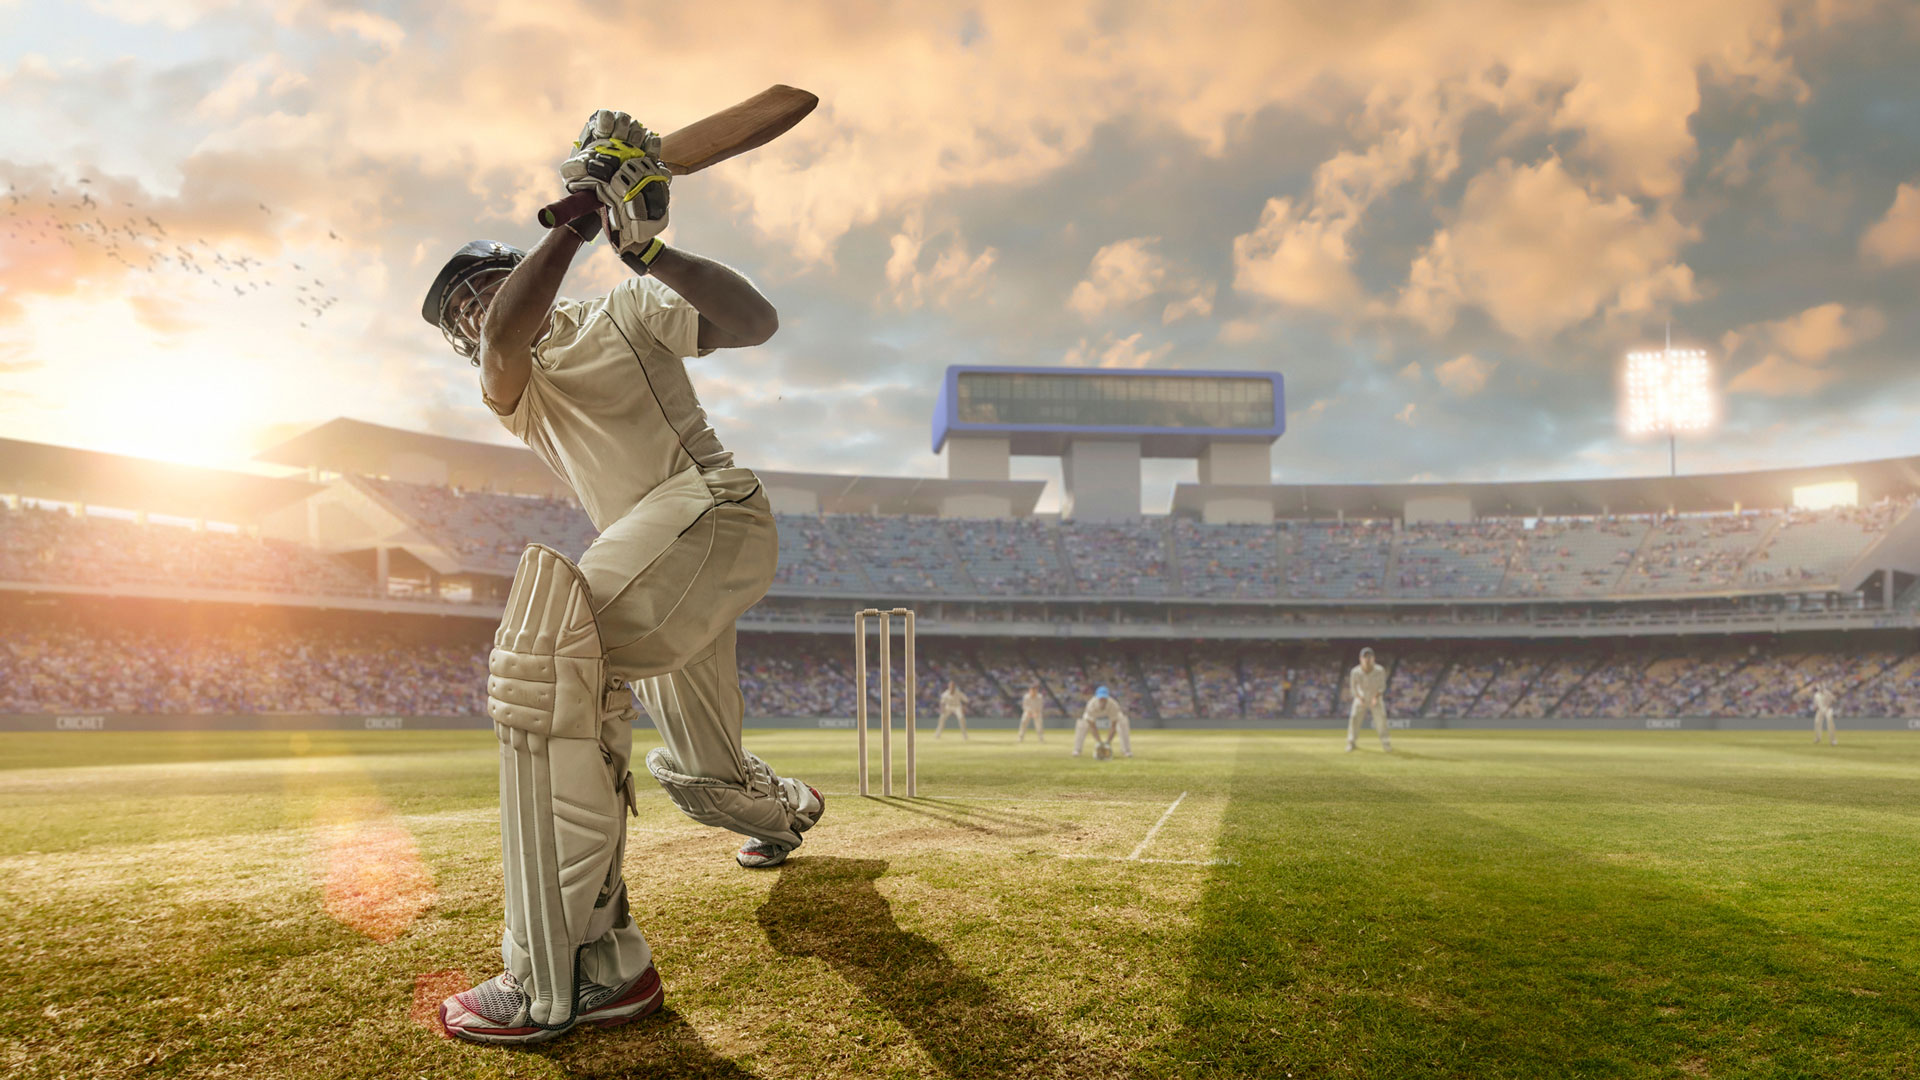 A comprehensive guide to finding the best cricket app